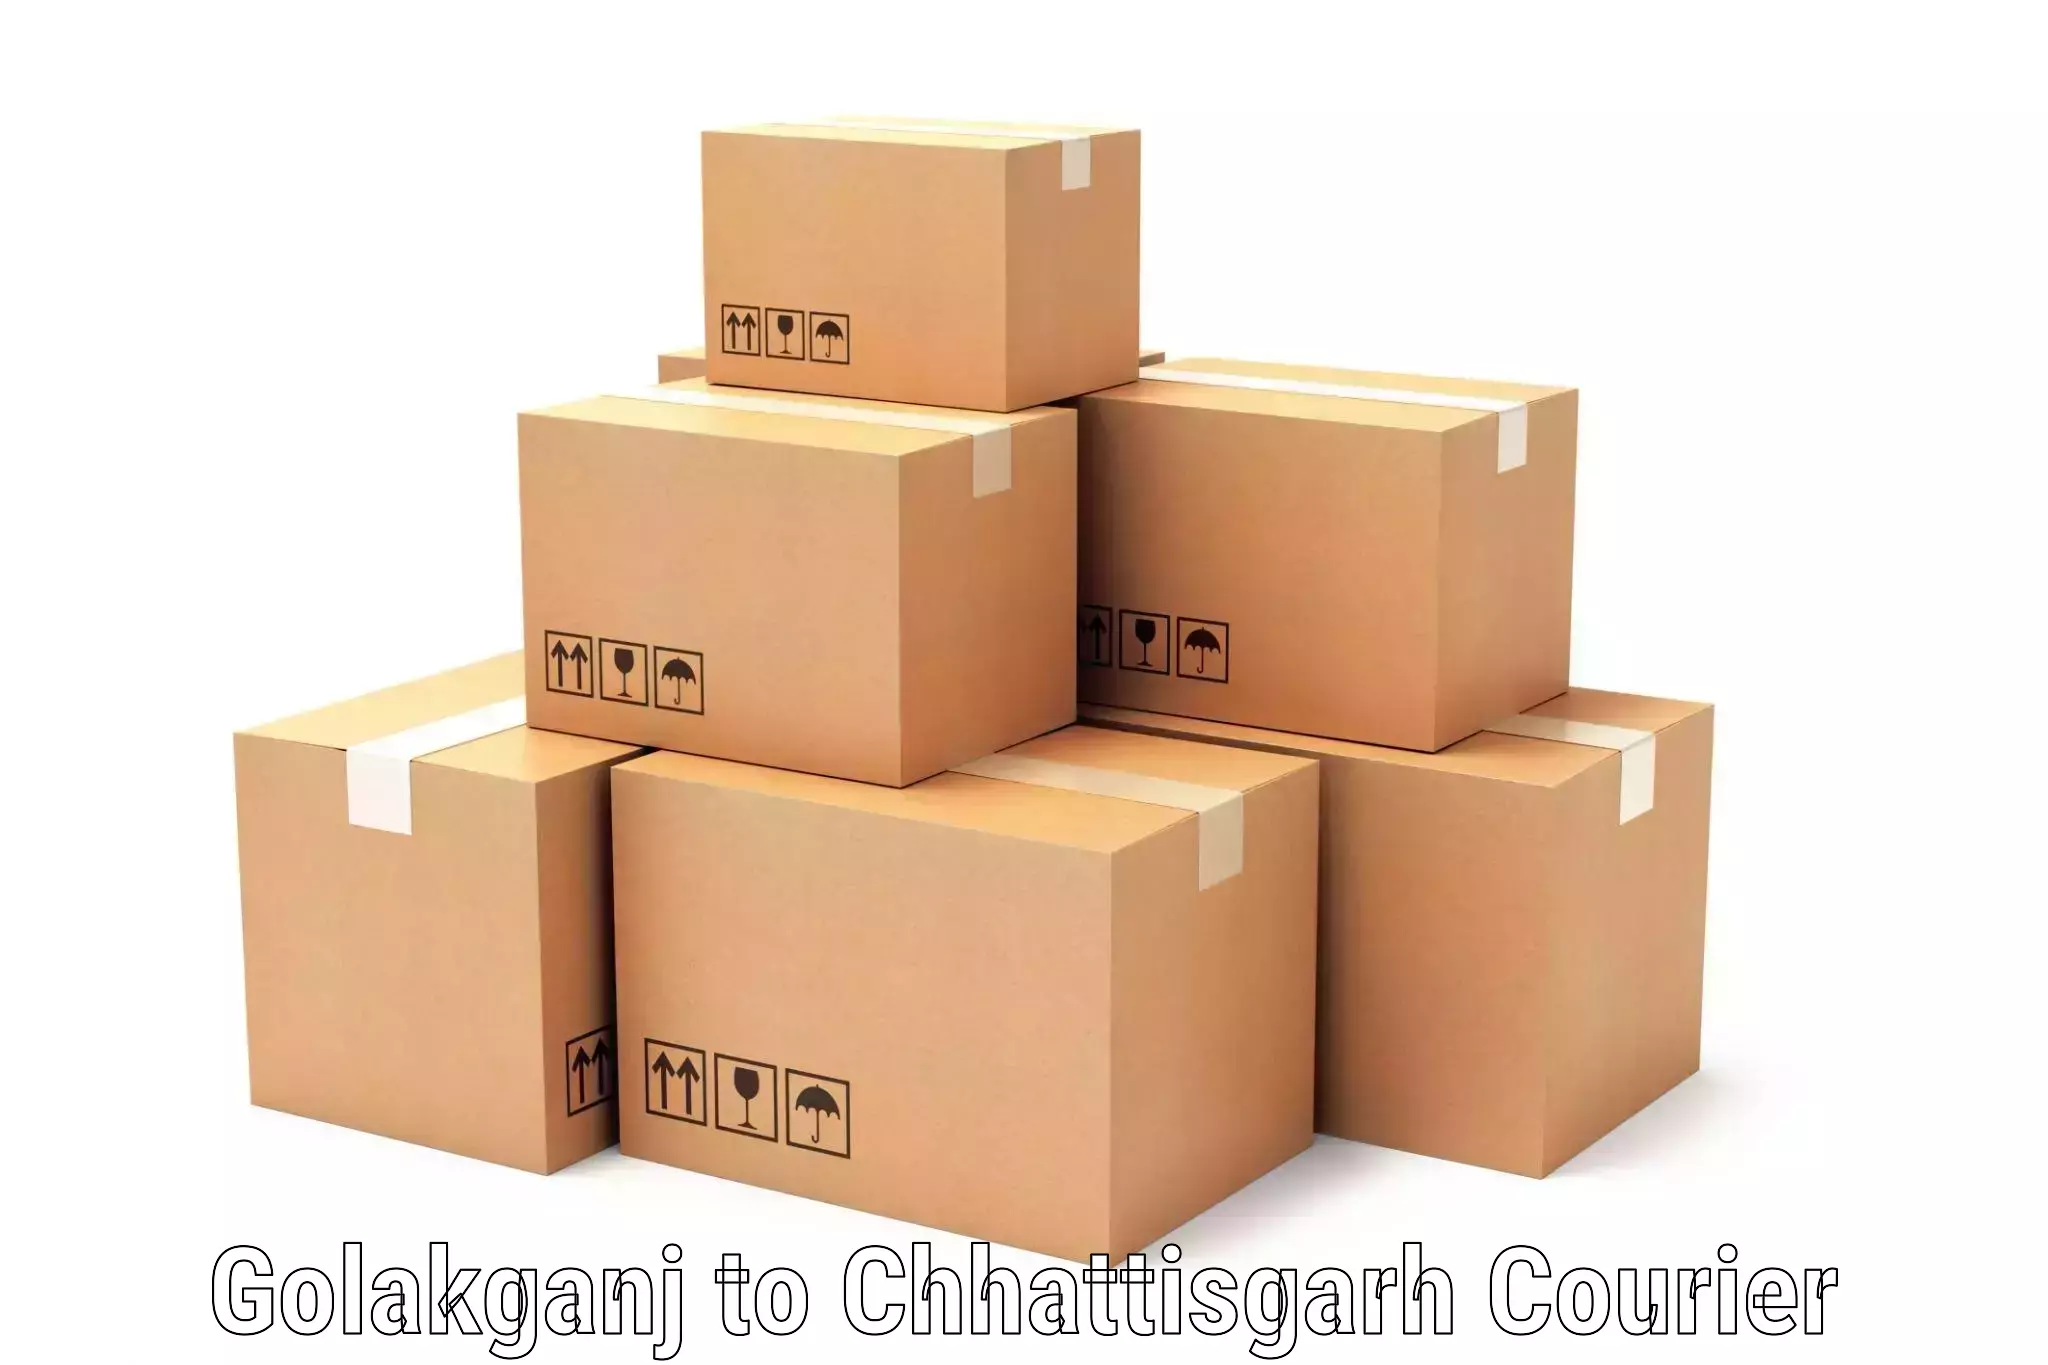 State-of-the-art courier technology Golakganj to Pithora